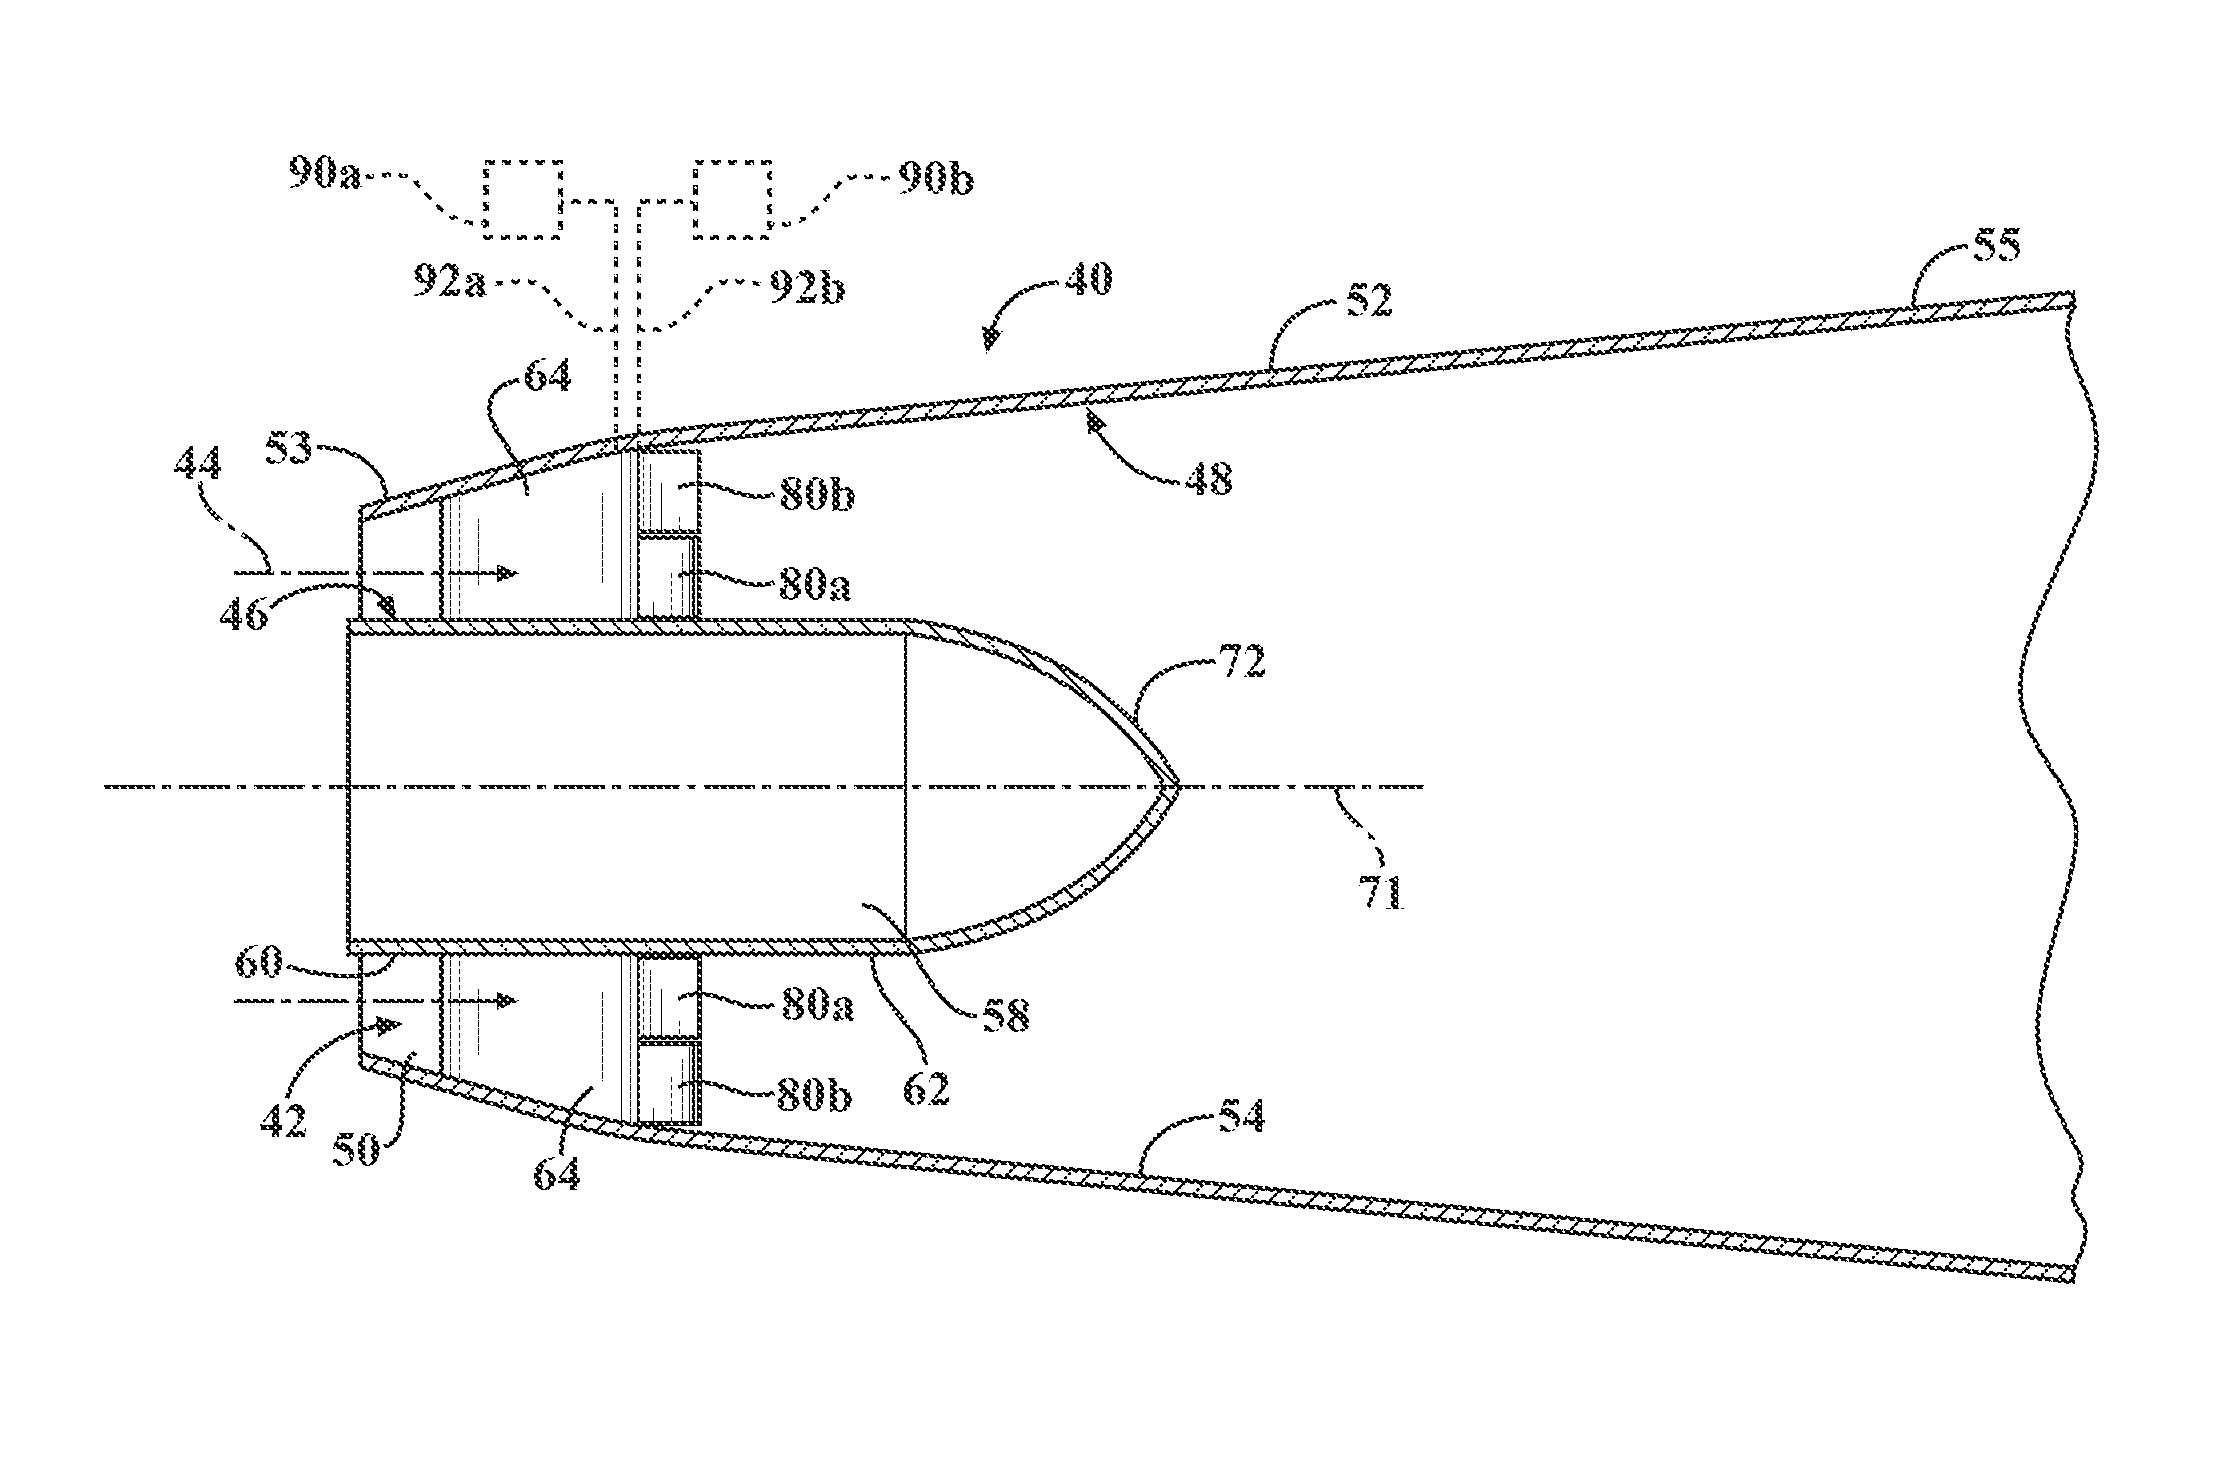 Diffuser with strut-induced vortex mixing